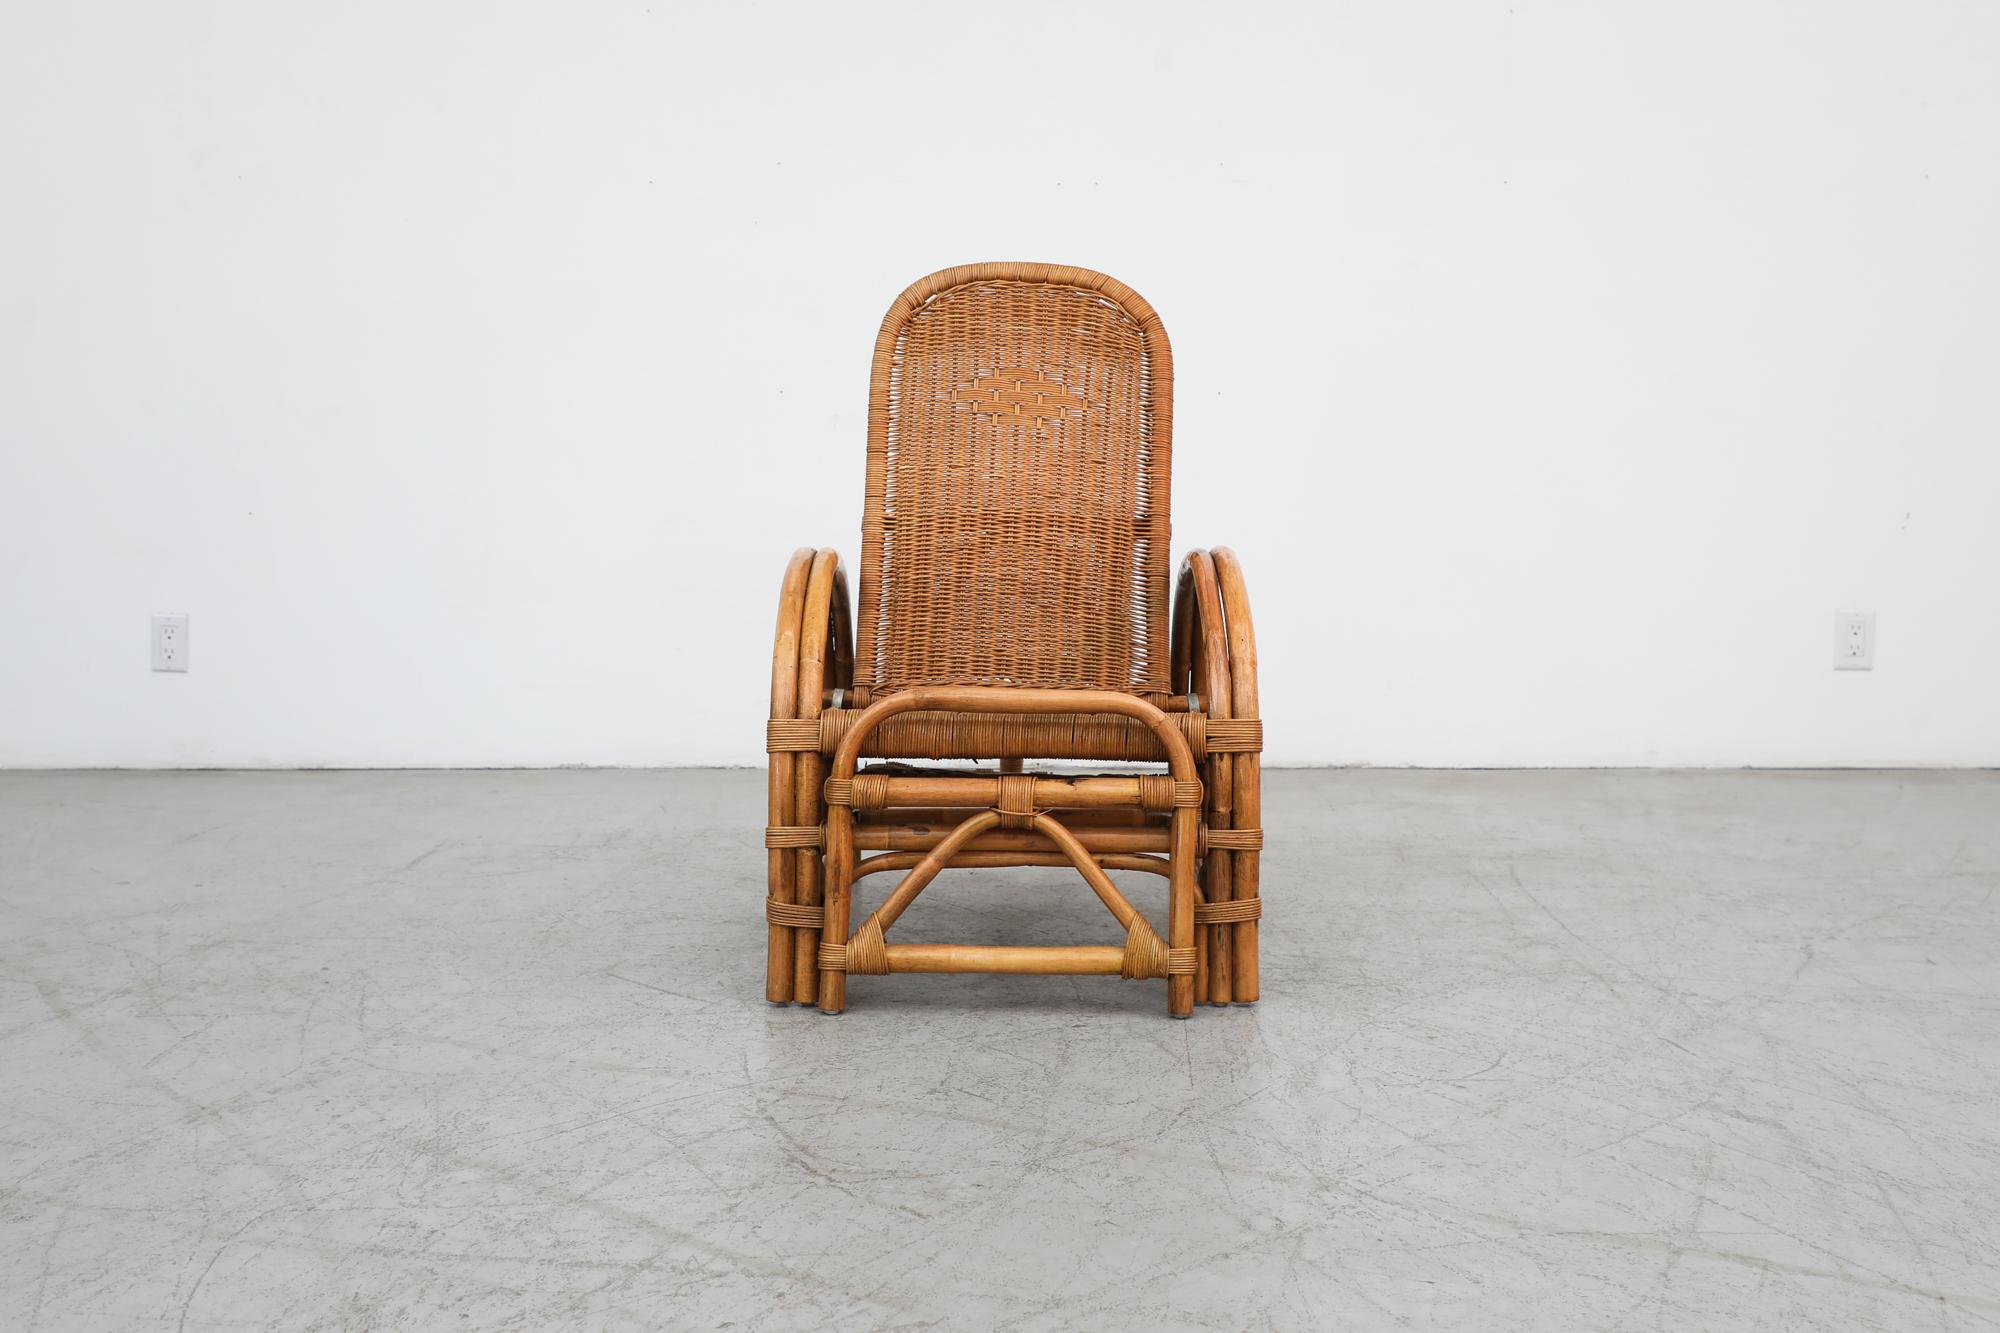 Gorgeous Franco Albini Inspired Mid-Century bamboo lounge chair to chaise with woven rattan seating and built in ottoman. The chair has an adjustable back and an attached ottoman that slides out from underneath the seat to make a chaise lounge. It's